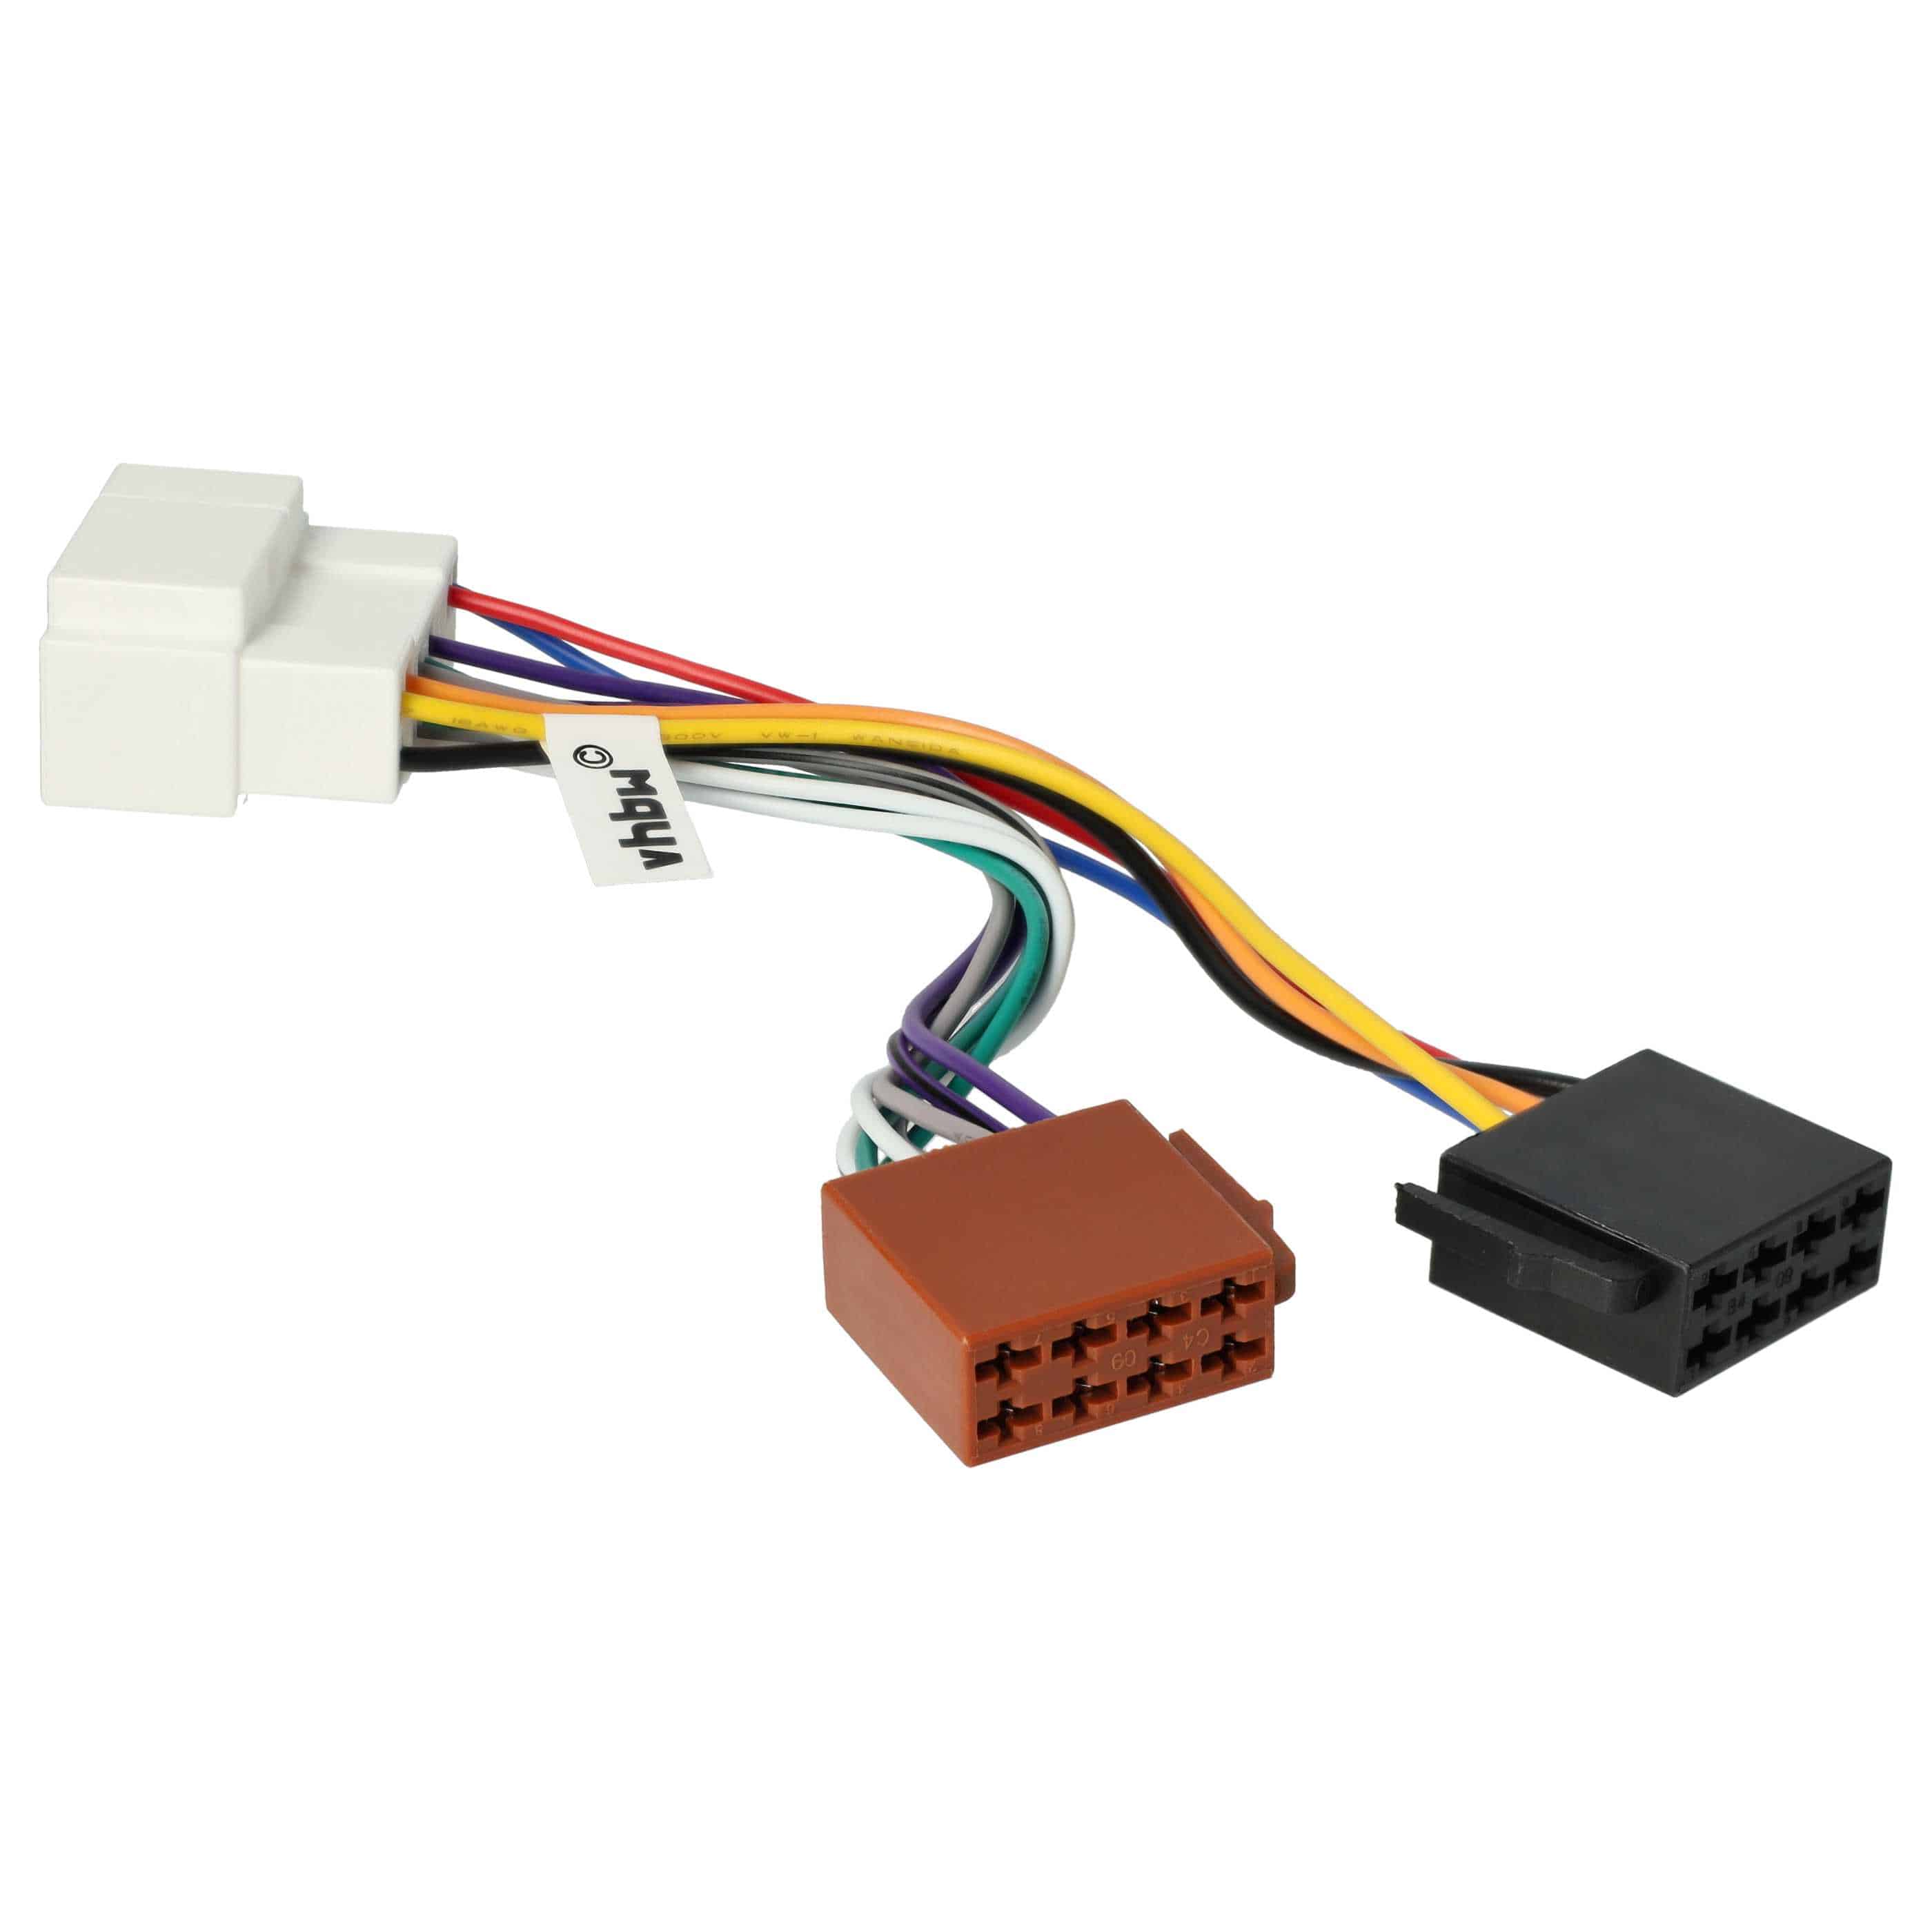 ISO Adapter suitable for 1998 - 2006 HondaCar Radio etc. - ISO 10487 Plug